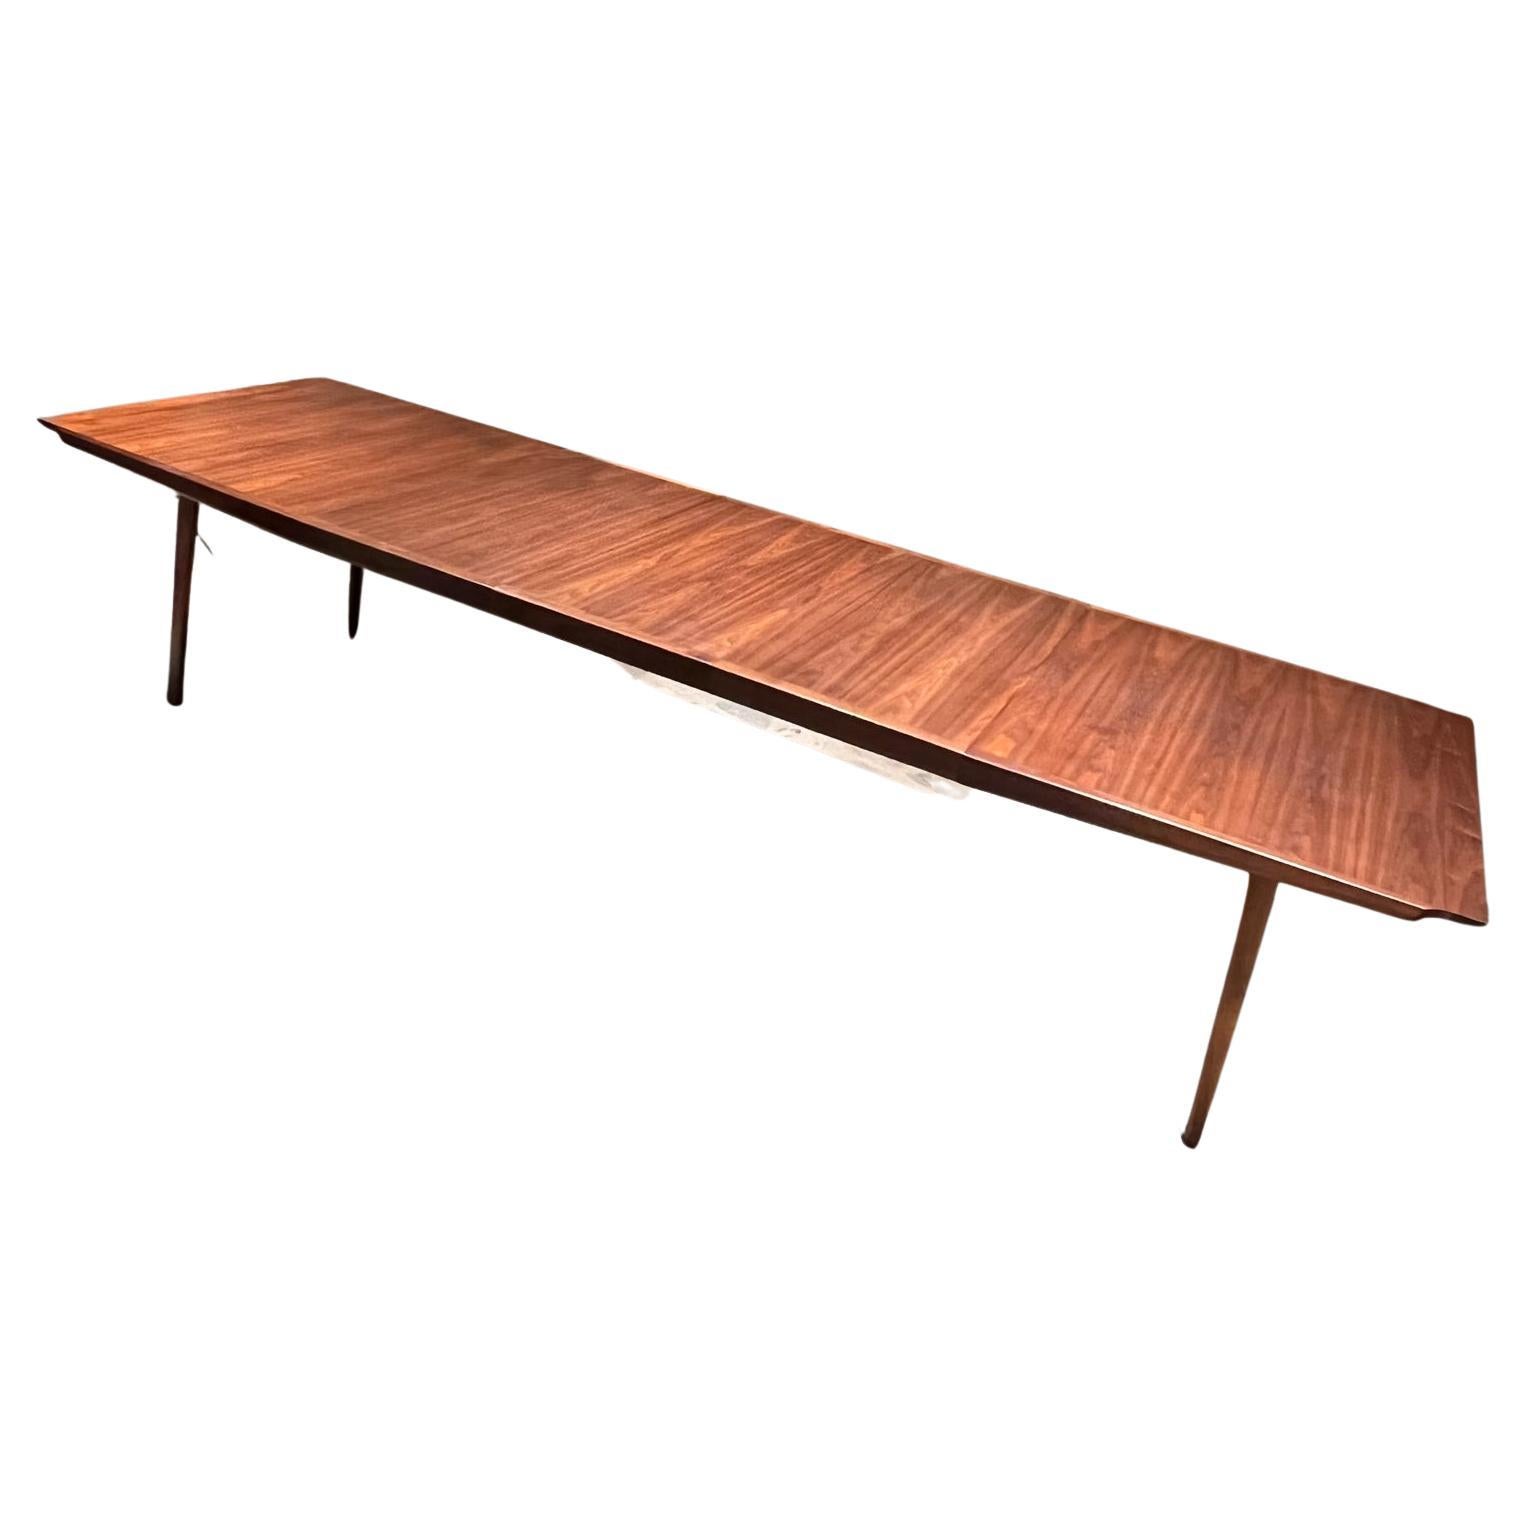 Modern mid-century dining table.
1960s exquisite Modern sculptural walnut wood expansive dining table
Elegant Rich wood grain and fabulous sculpted design at corner edge.
Designed by Richard Thompson for Glenn of CA
No label present.
Measures: